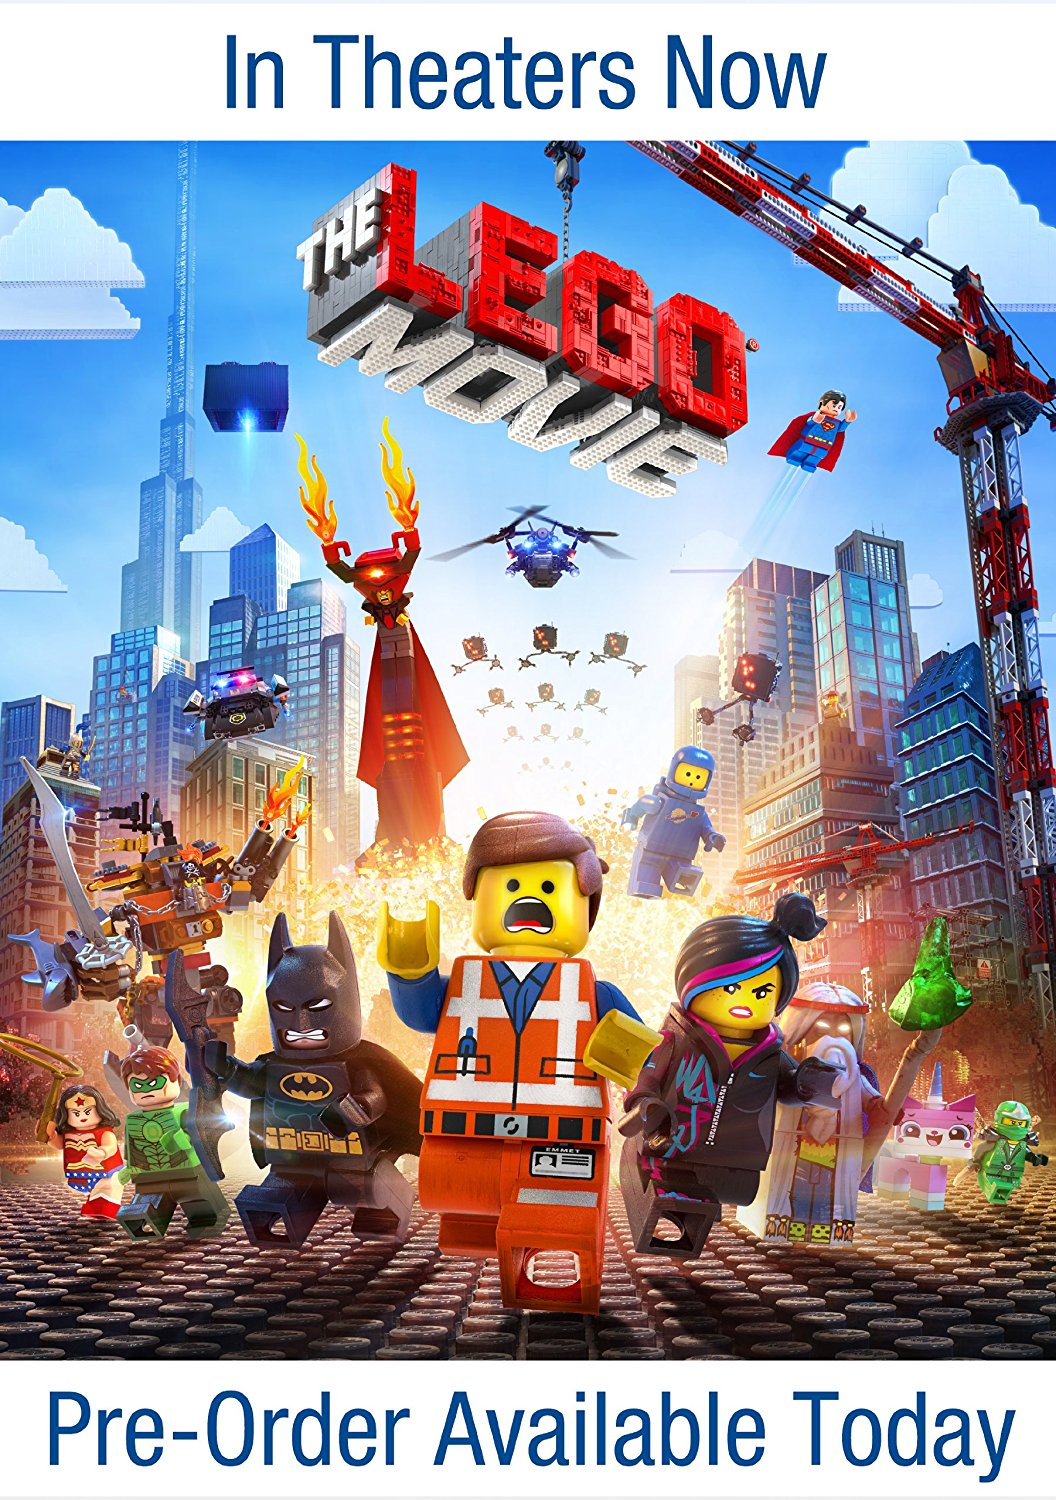 The LEGO Movie (3D Blu-ray + Blu-ray + DVD + UltraViolet Combo Pack)